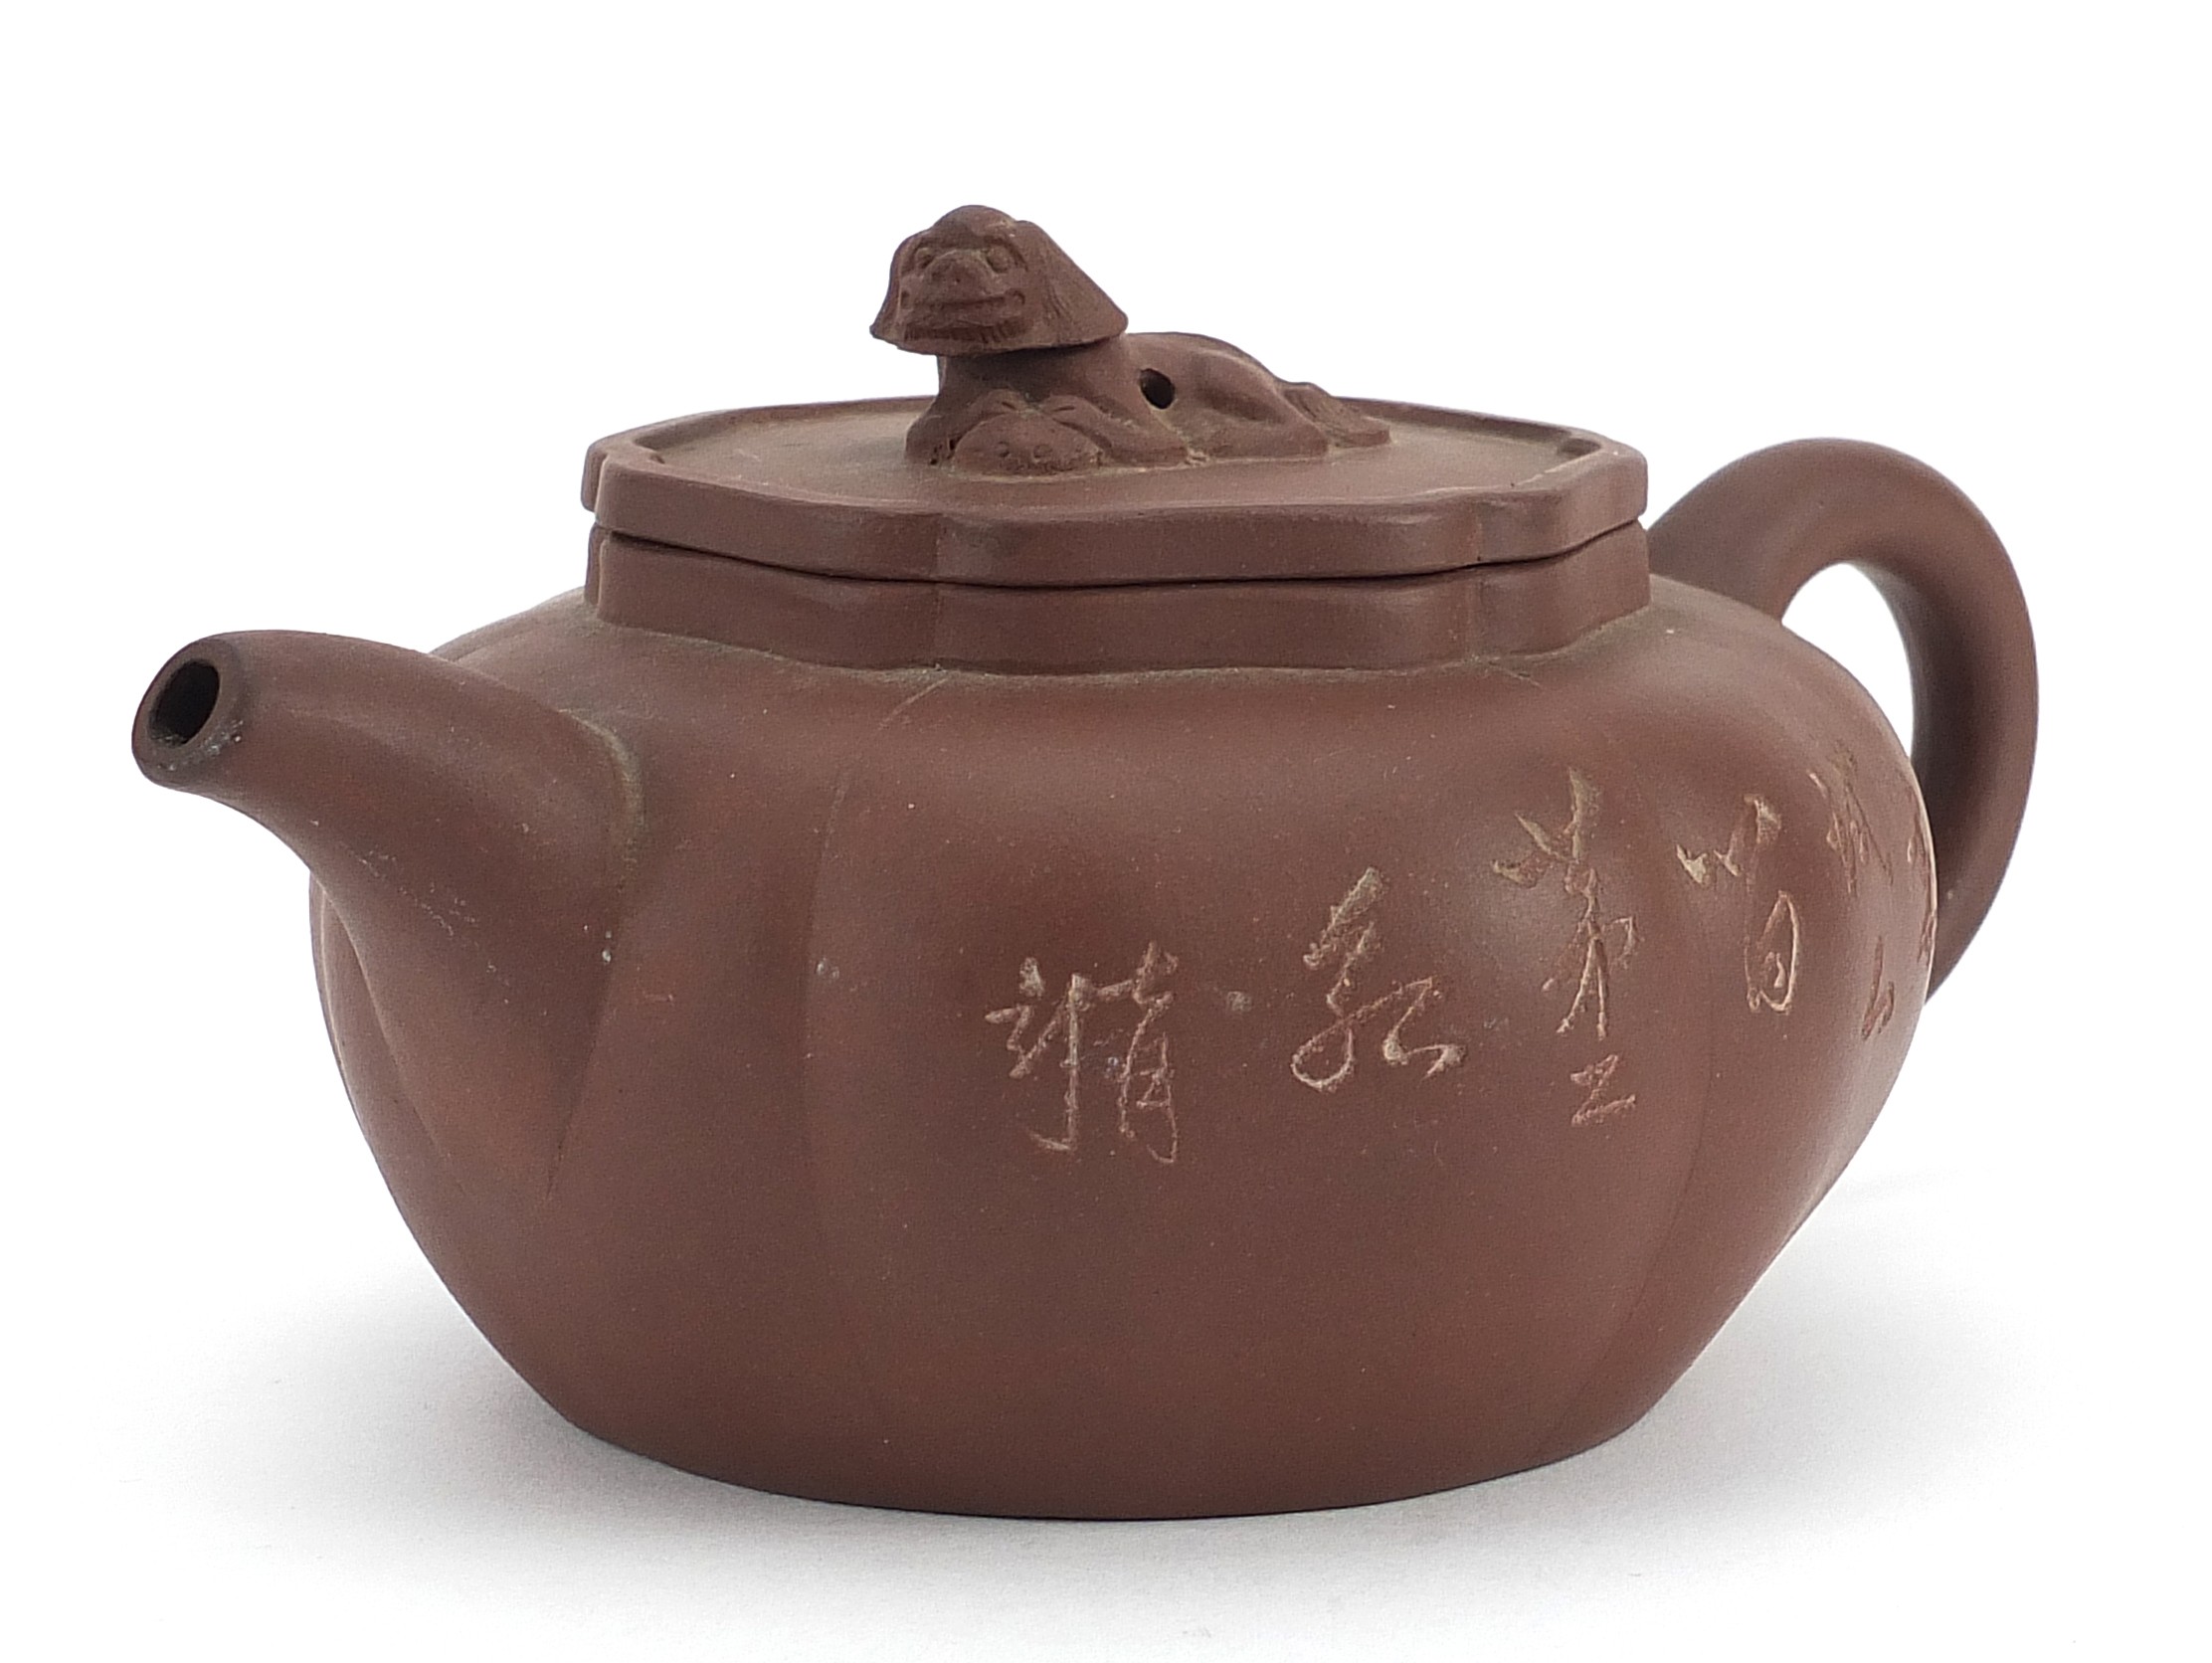 Chinese Yixing terracotta teapot incised with calligraphy and flowers, impressed character marks